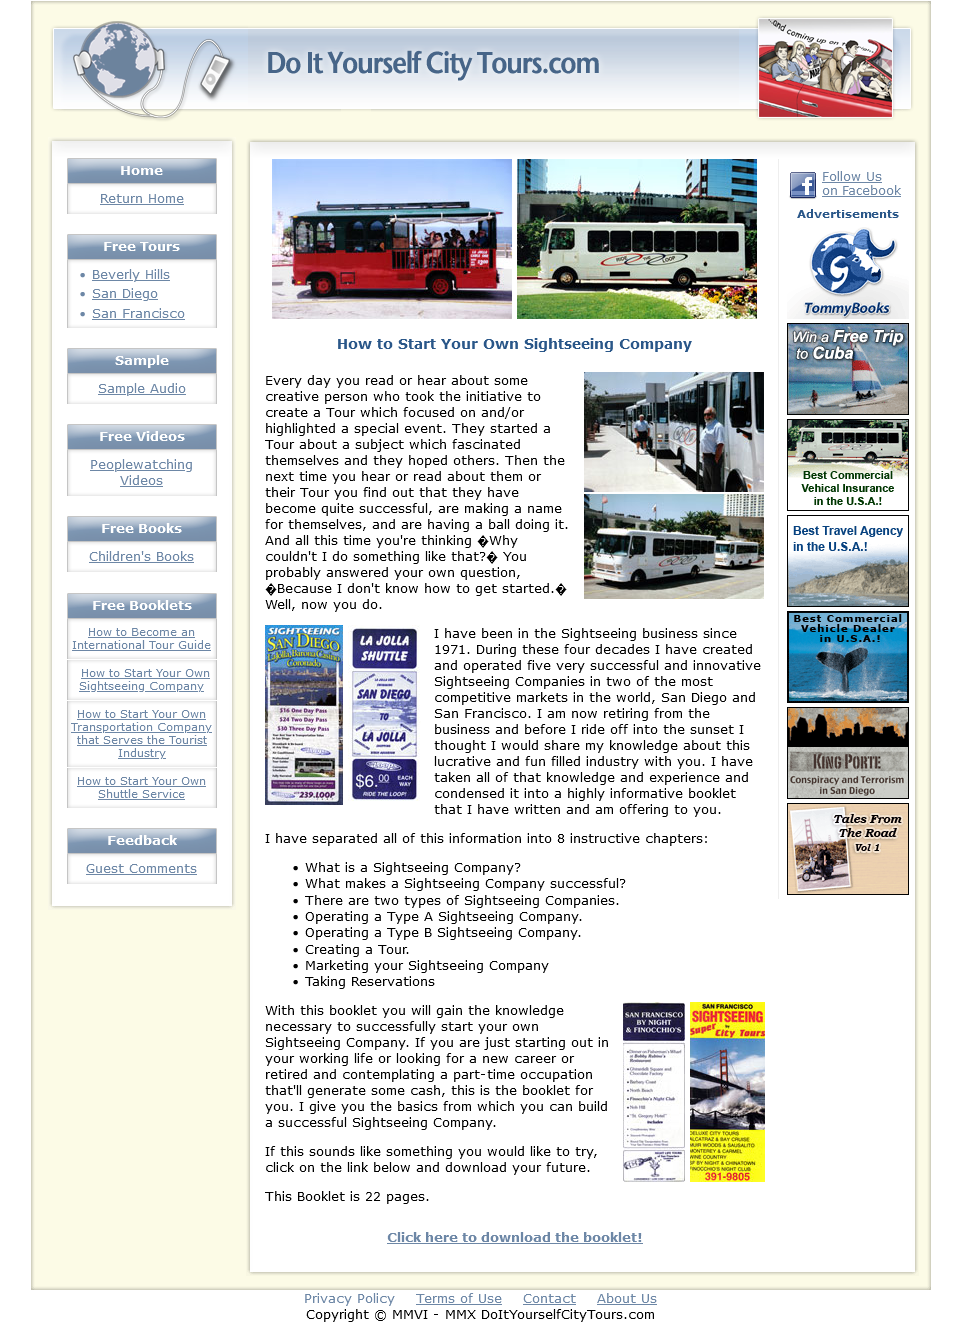 In 2006 I created a web site called doityourselfcitytours.com (screenshot). On that site you could download self-driving tours of San Francisco, Beverly Hills and San Diego; an illustrated children's book called Daniel the Cable Car; and multiple travel industry related self-help booklets. By that time I had spent 35 fabulous and innovative  years in the travel industry and I wanted to share my knowledge and experience with inquiring minds. For example a company I started in 1987 is today one of the most successful sightseeing companies in the world, Grey Line of San Francisco.    Over the last 17 years thousands of people from around the world have downloaded files from that site. Among those thousands are a handful of people whom I have happily mentored as they embarked on a travel industry career.    I finally closed that site down this year. It was rickety and out-dated. But the memory of so many people thanking me for the booklet  How to Start Your Own Sightseeing Company got me to dig it out and again read what I had written so long ago. And do you know that most of that information is still pertinent today?      I decided to continue sharing that booklet with travel industry wannabes. So if you're interested in reading my take on starting your own sightseeing company click here.